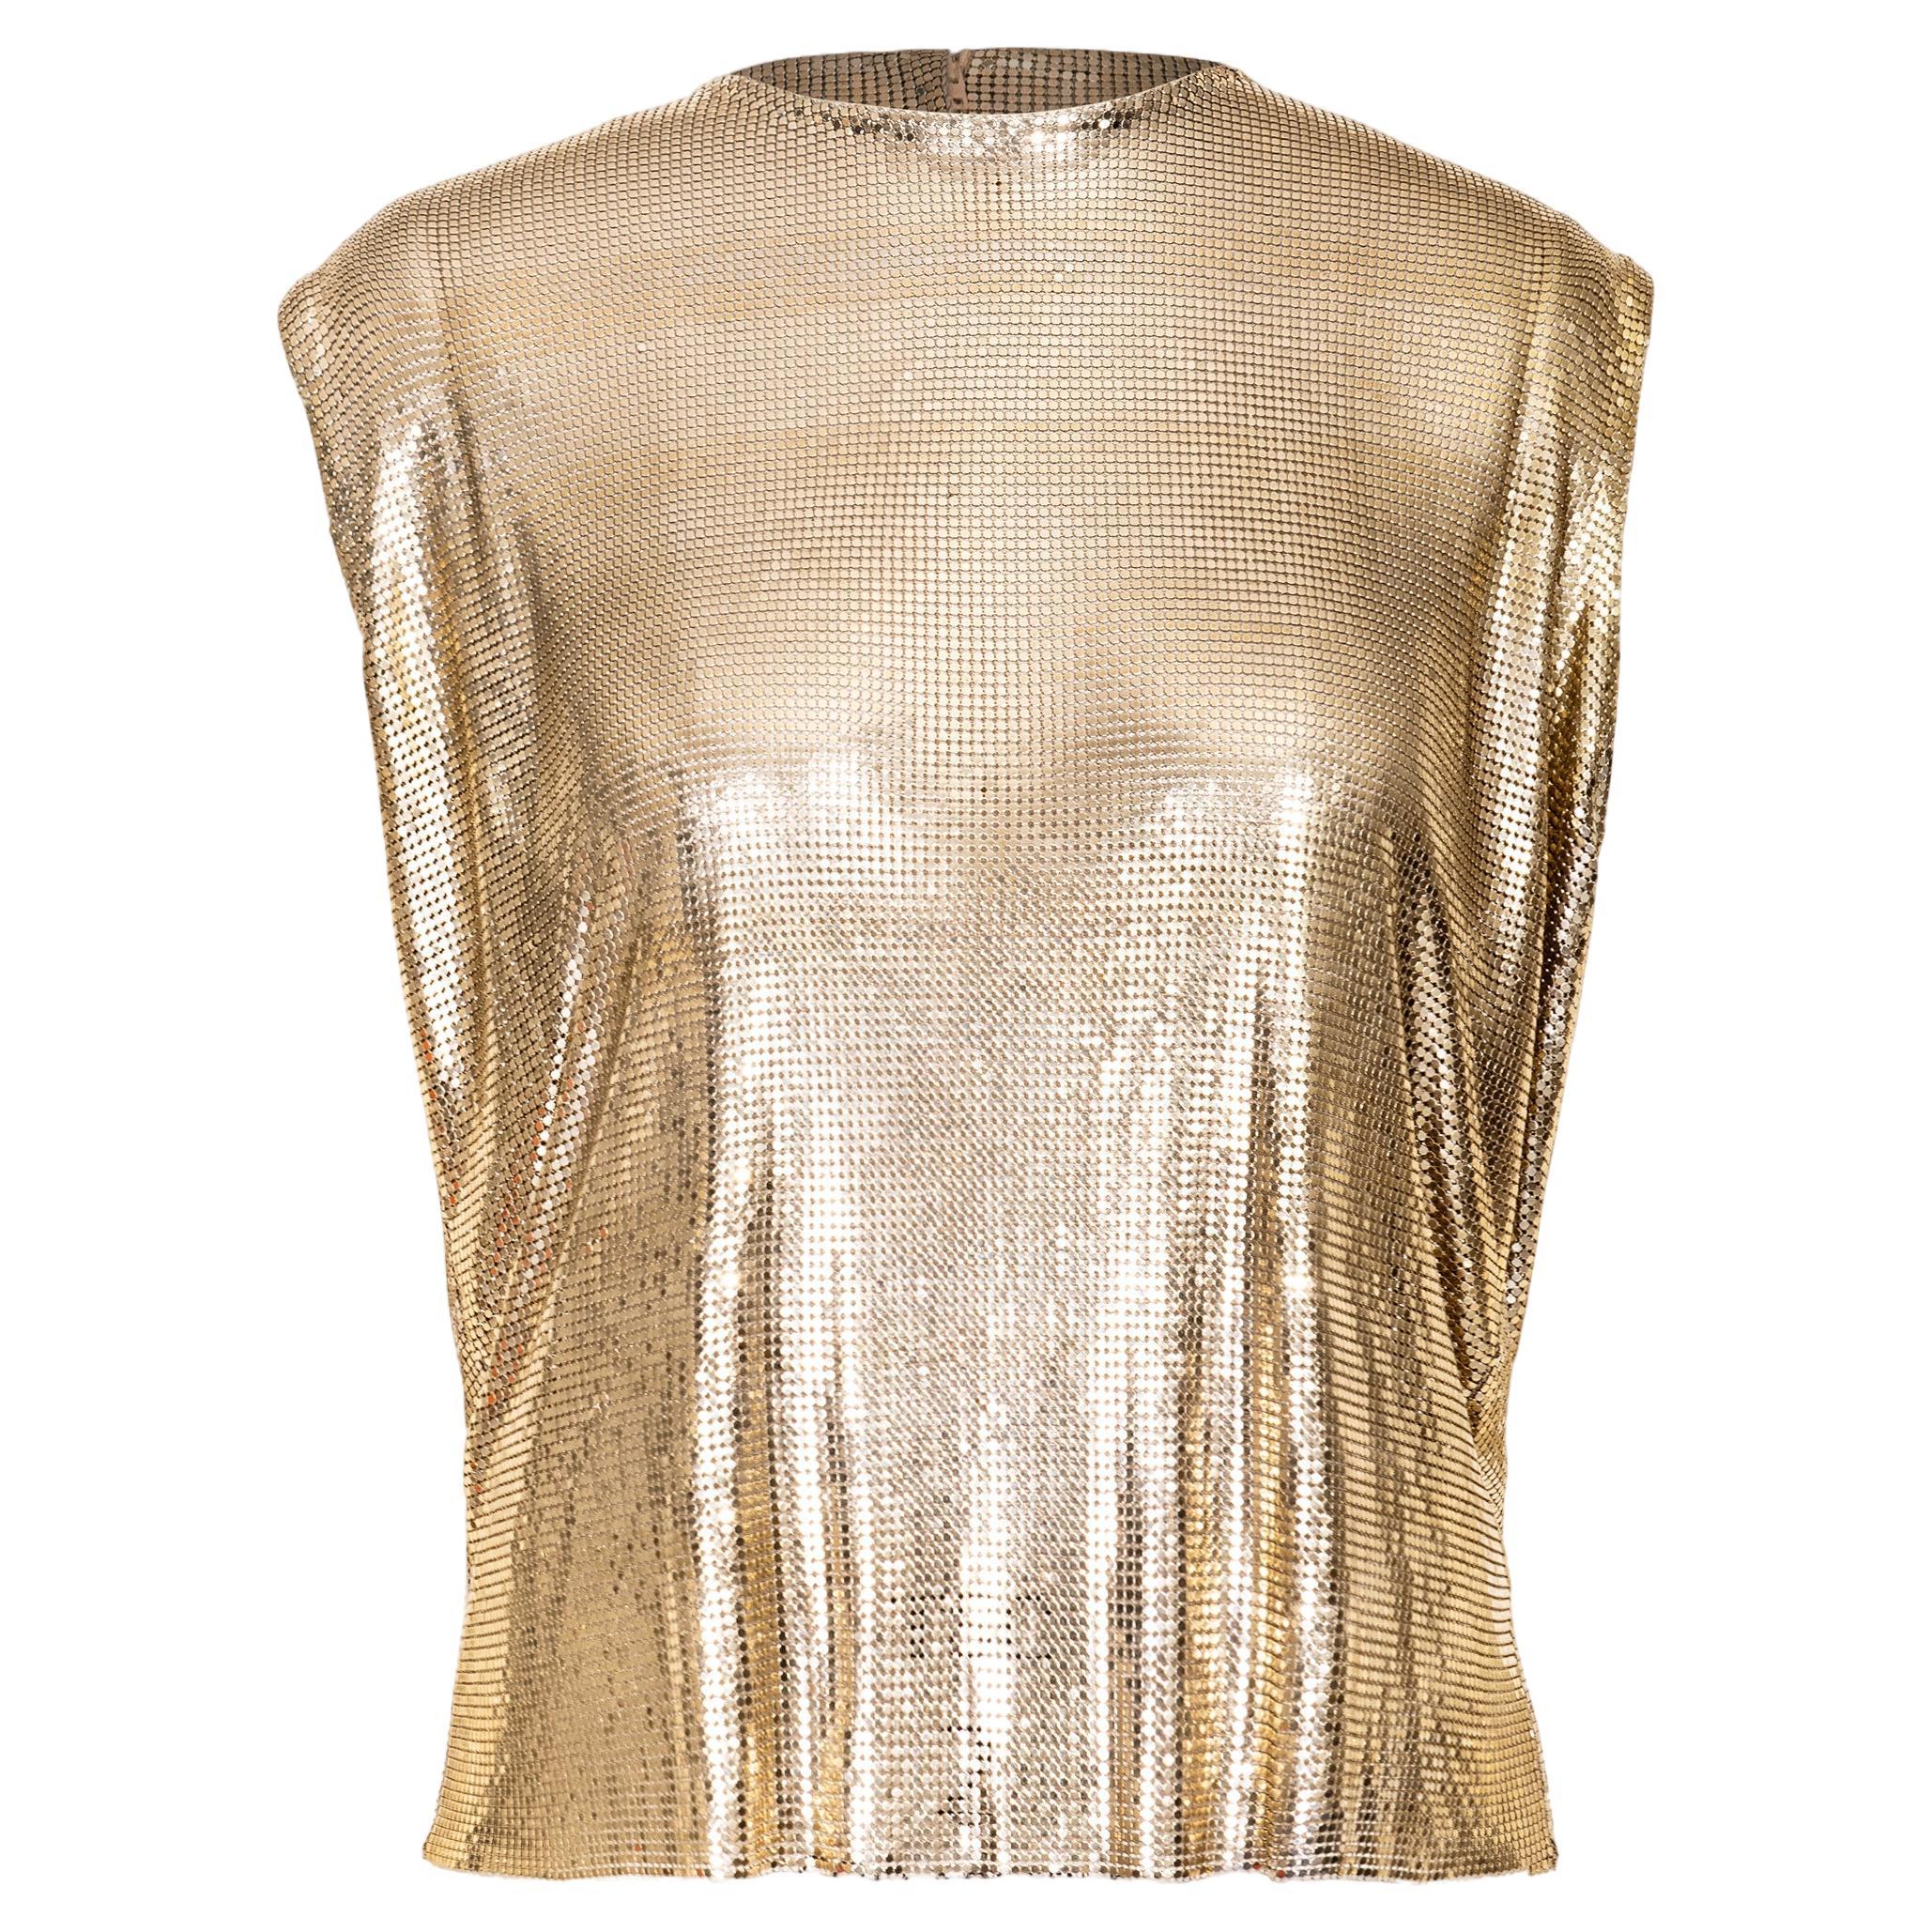 1980's Gianni Versace Gold Oroton Cap Sleeve Chainmail Top